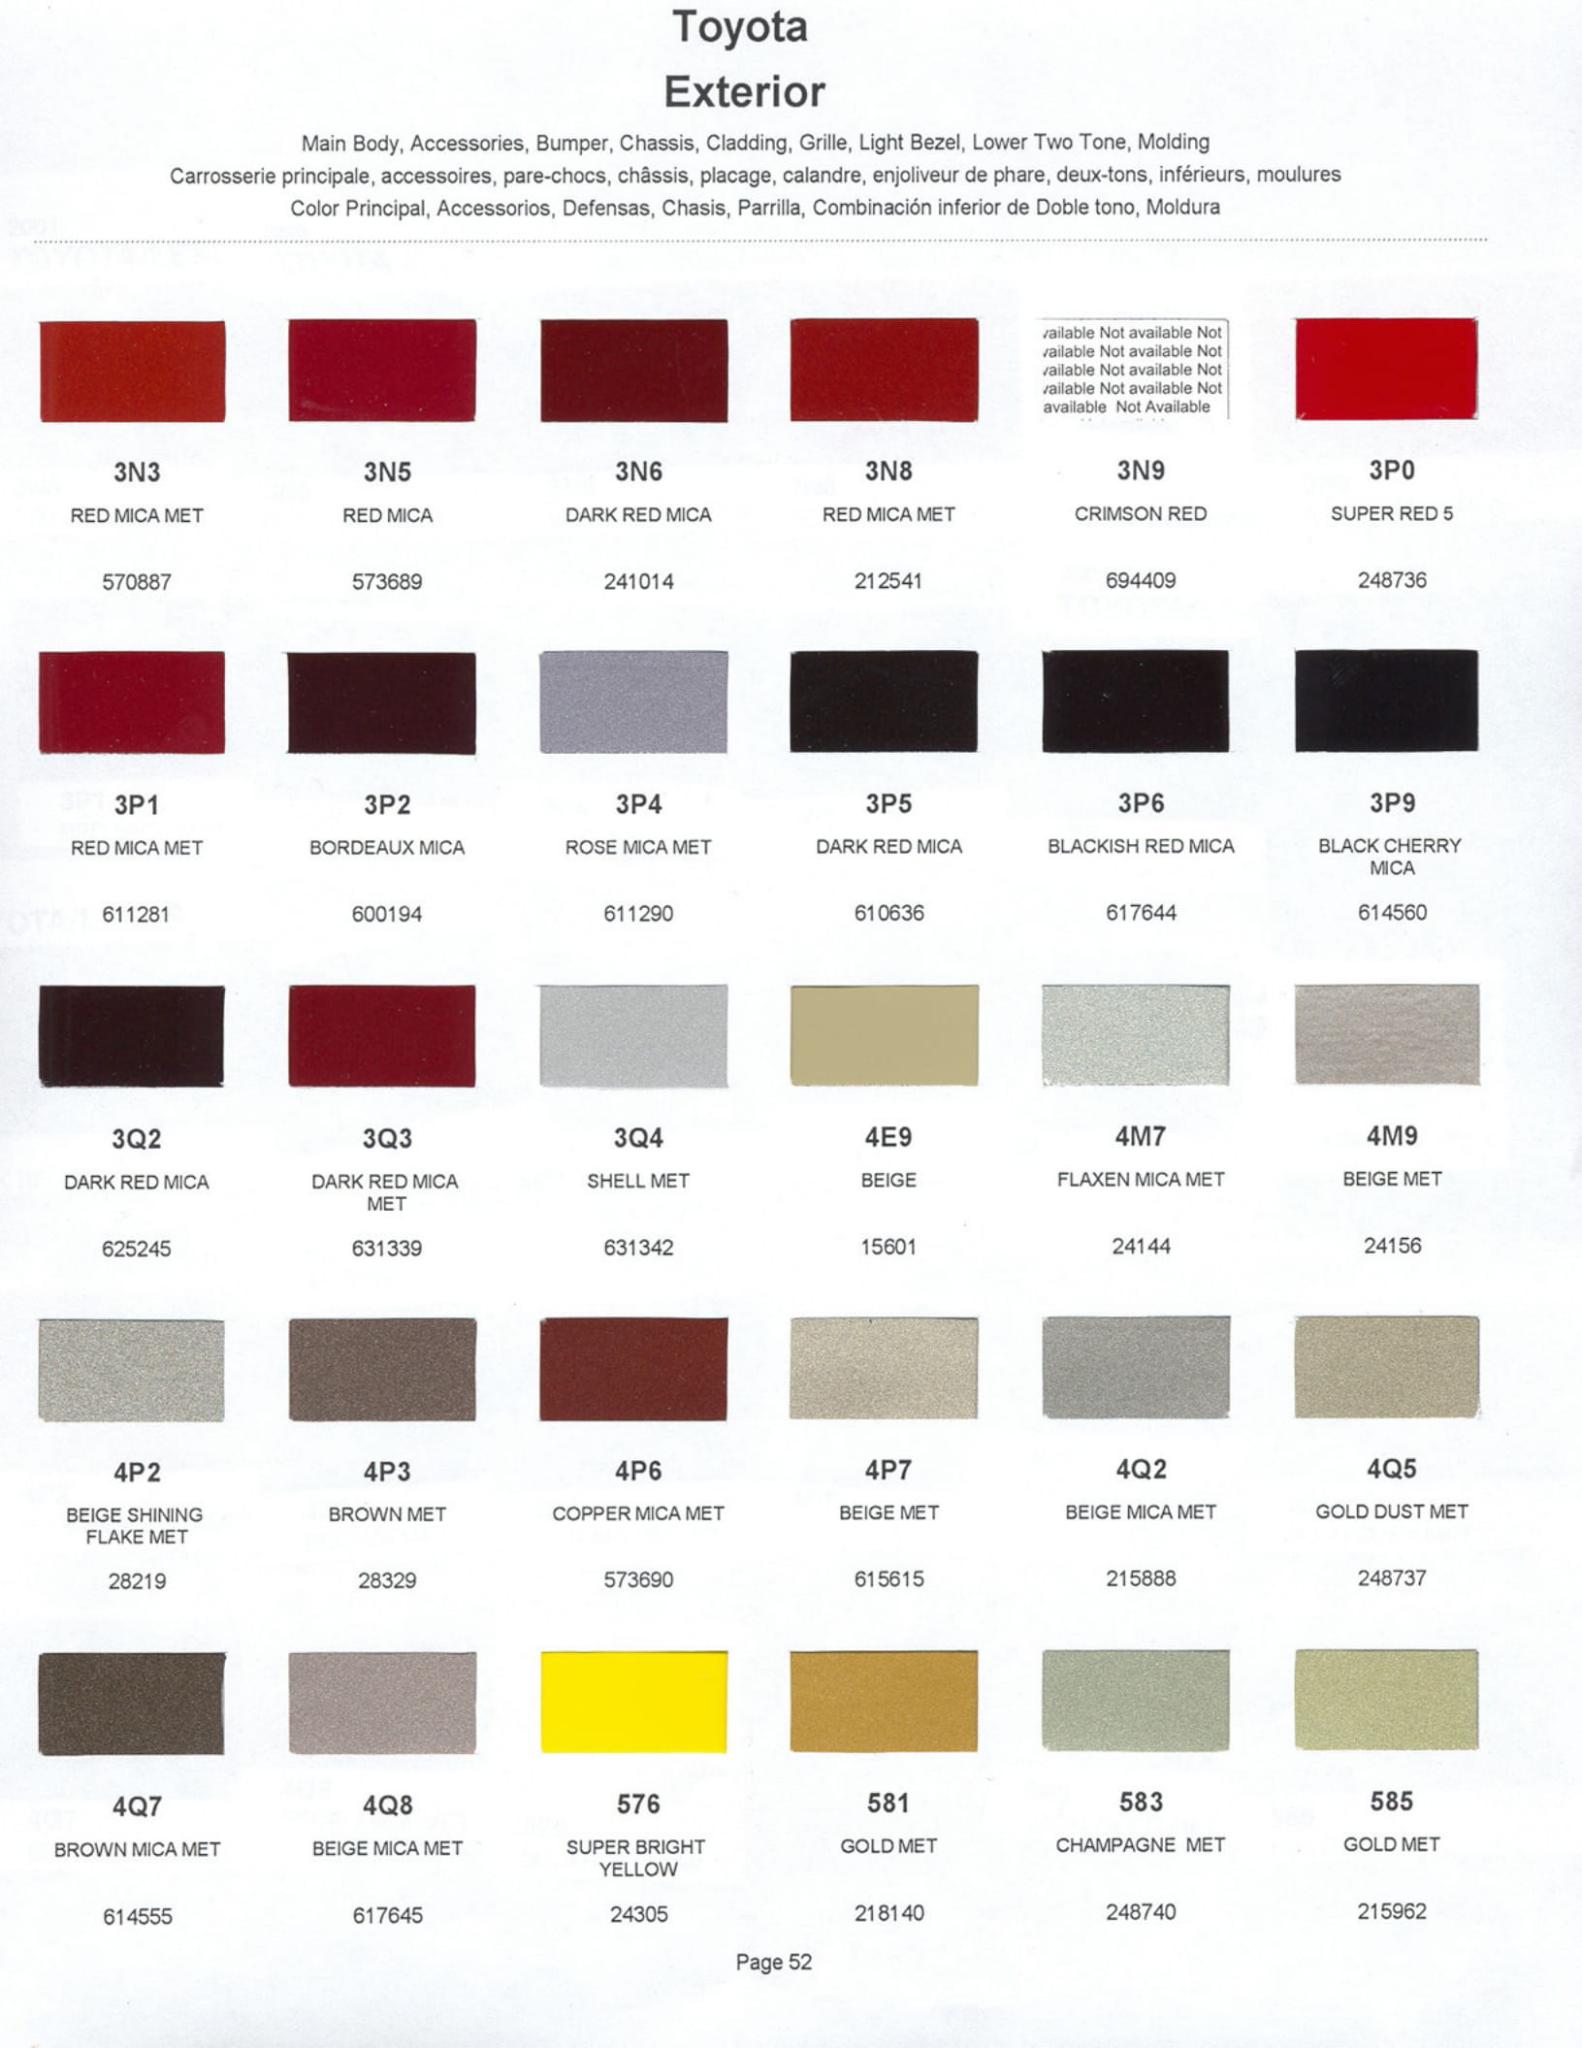 Toyoto / Lexus Paint Code and Color Chart